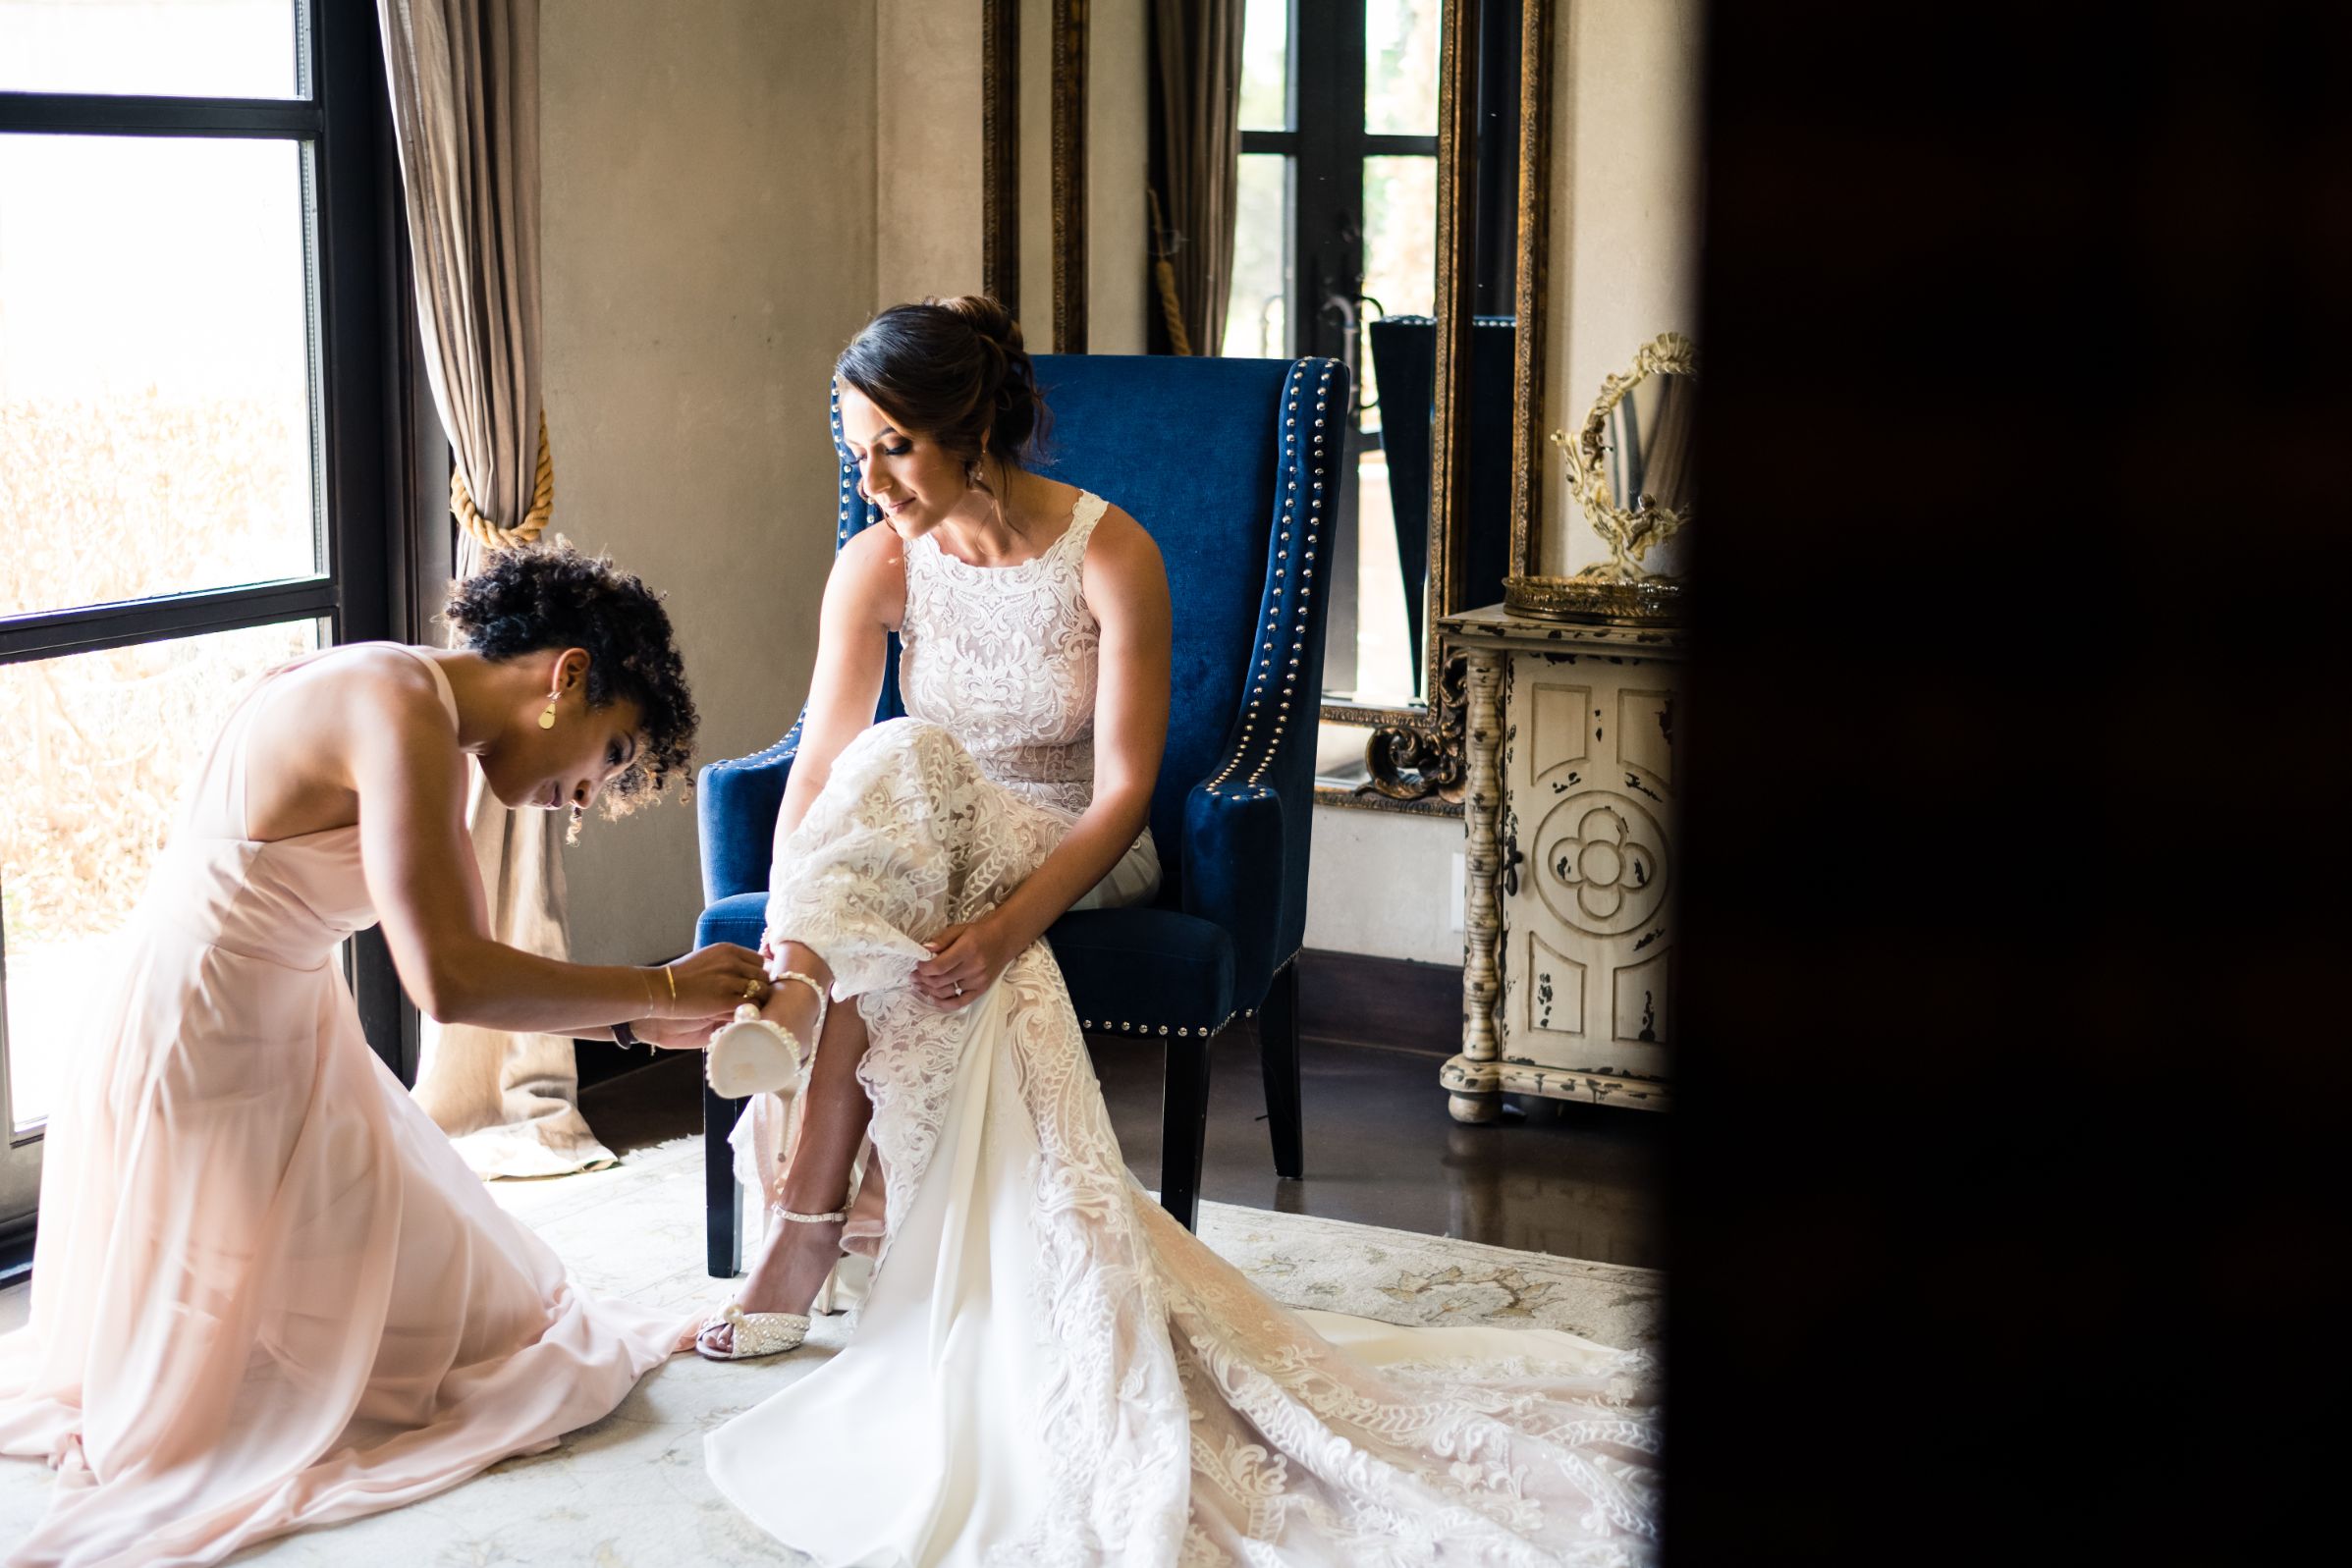 A bride sits in a blue chair while a bridesmaid kneels to help the bride buckle her shoes in a bridal suite.